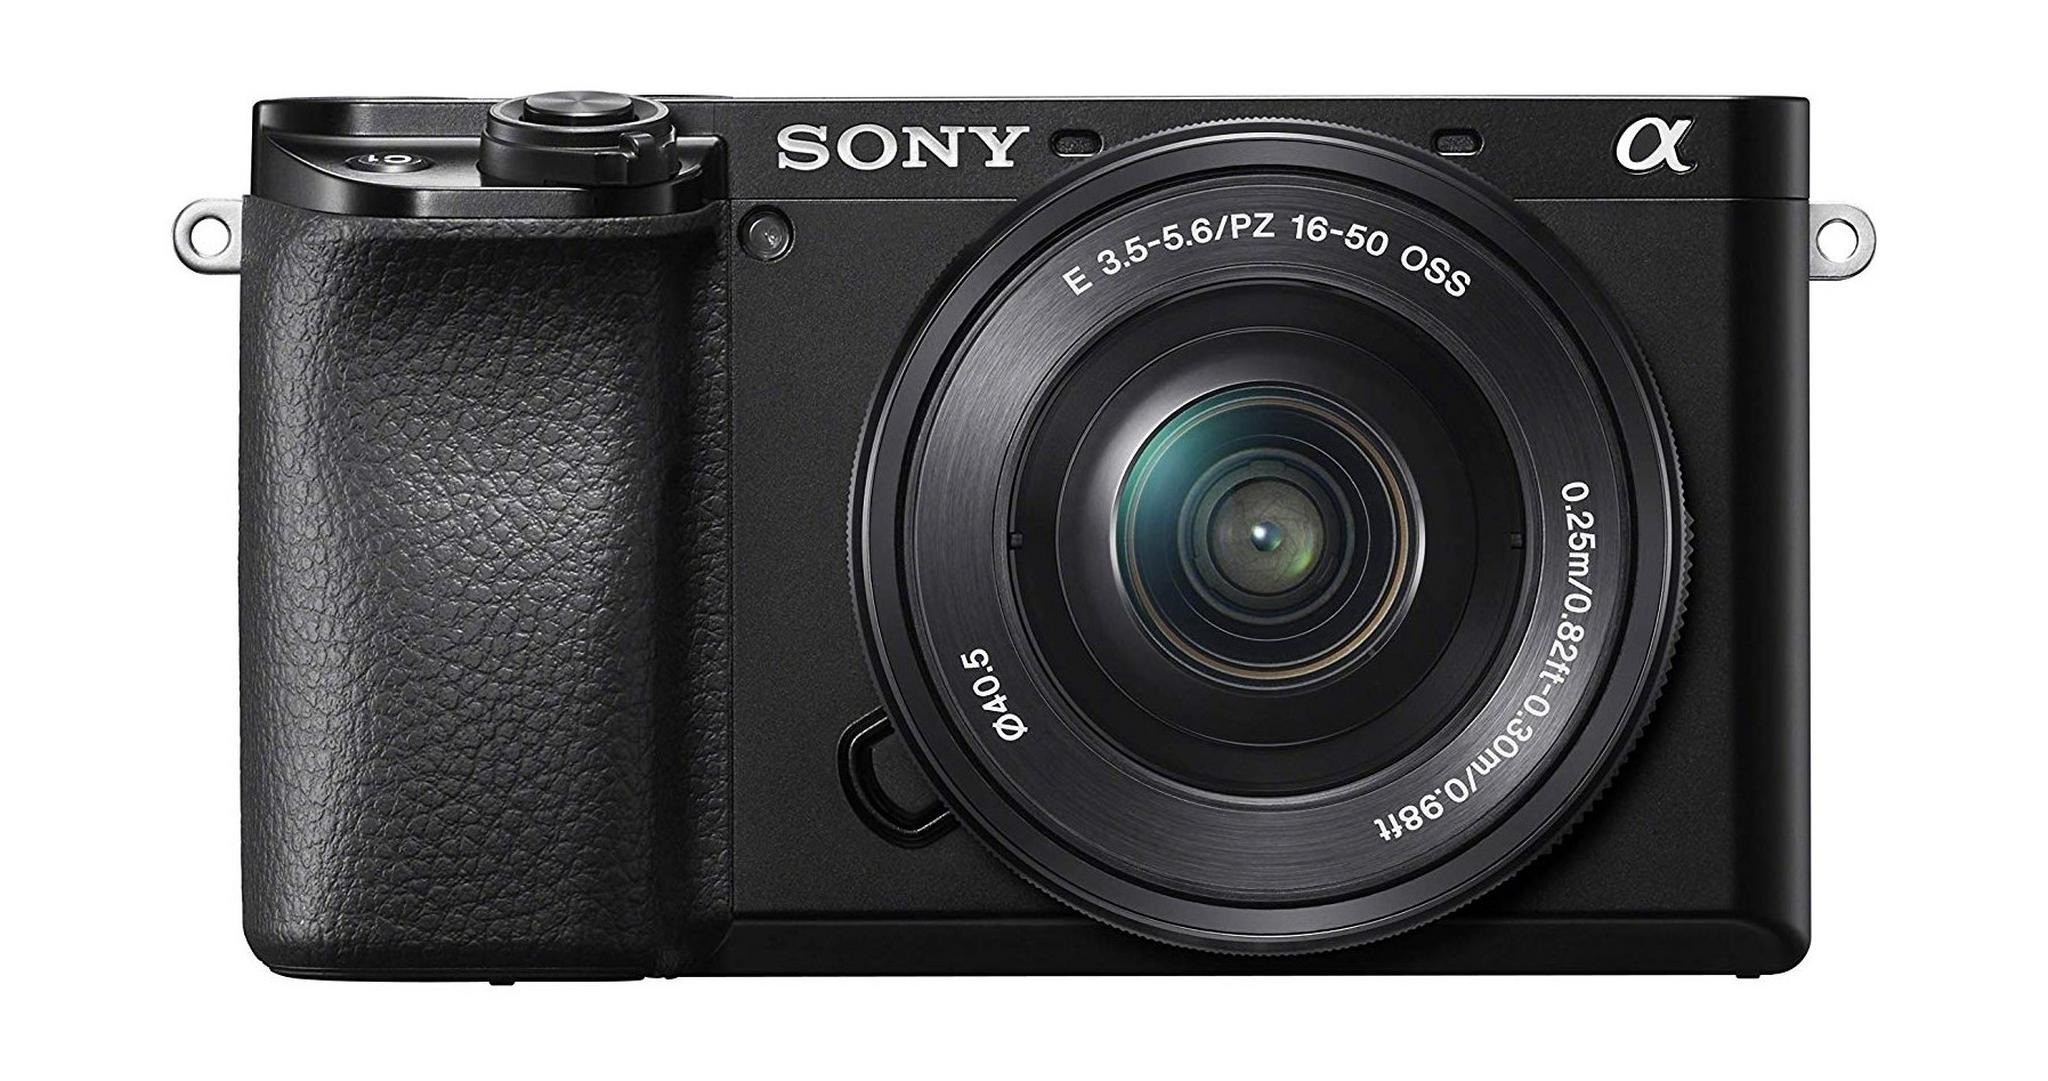 Sony Alpha A6100 Mirrorless Digital Camera with 16-50mm Lenses